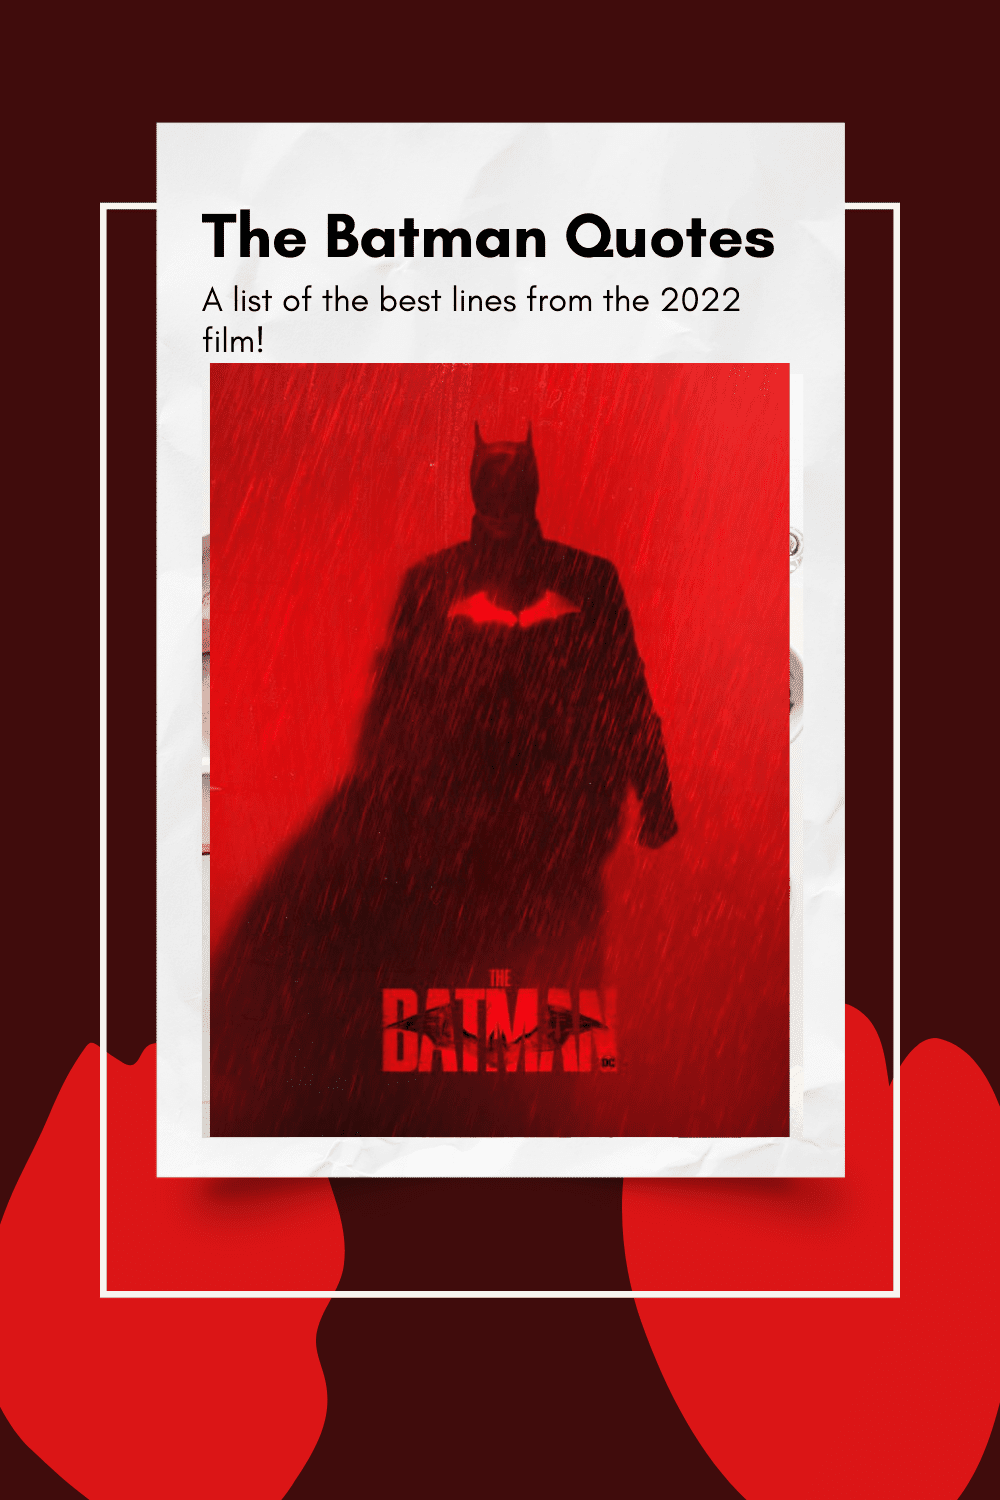 The Batman Quotes - Top quotes from the 2022 film. - Enza's Bargains